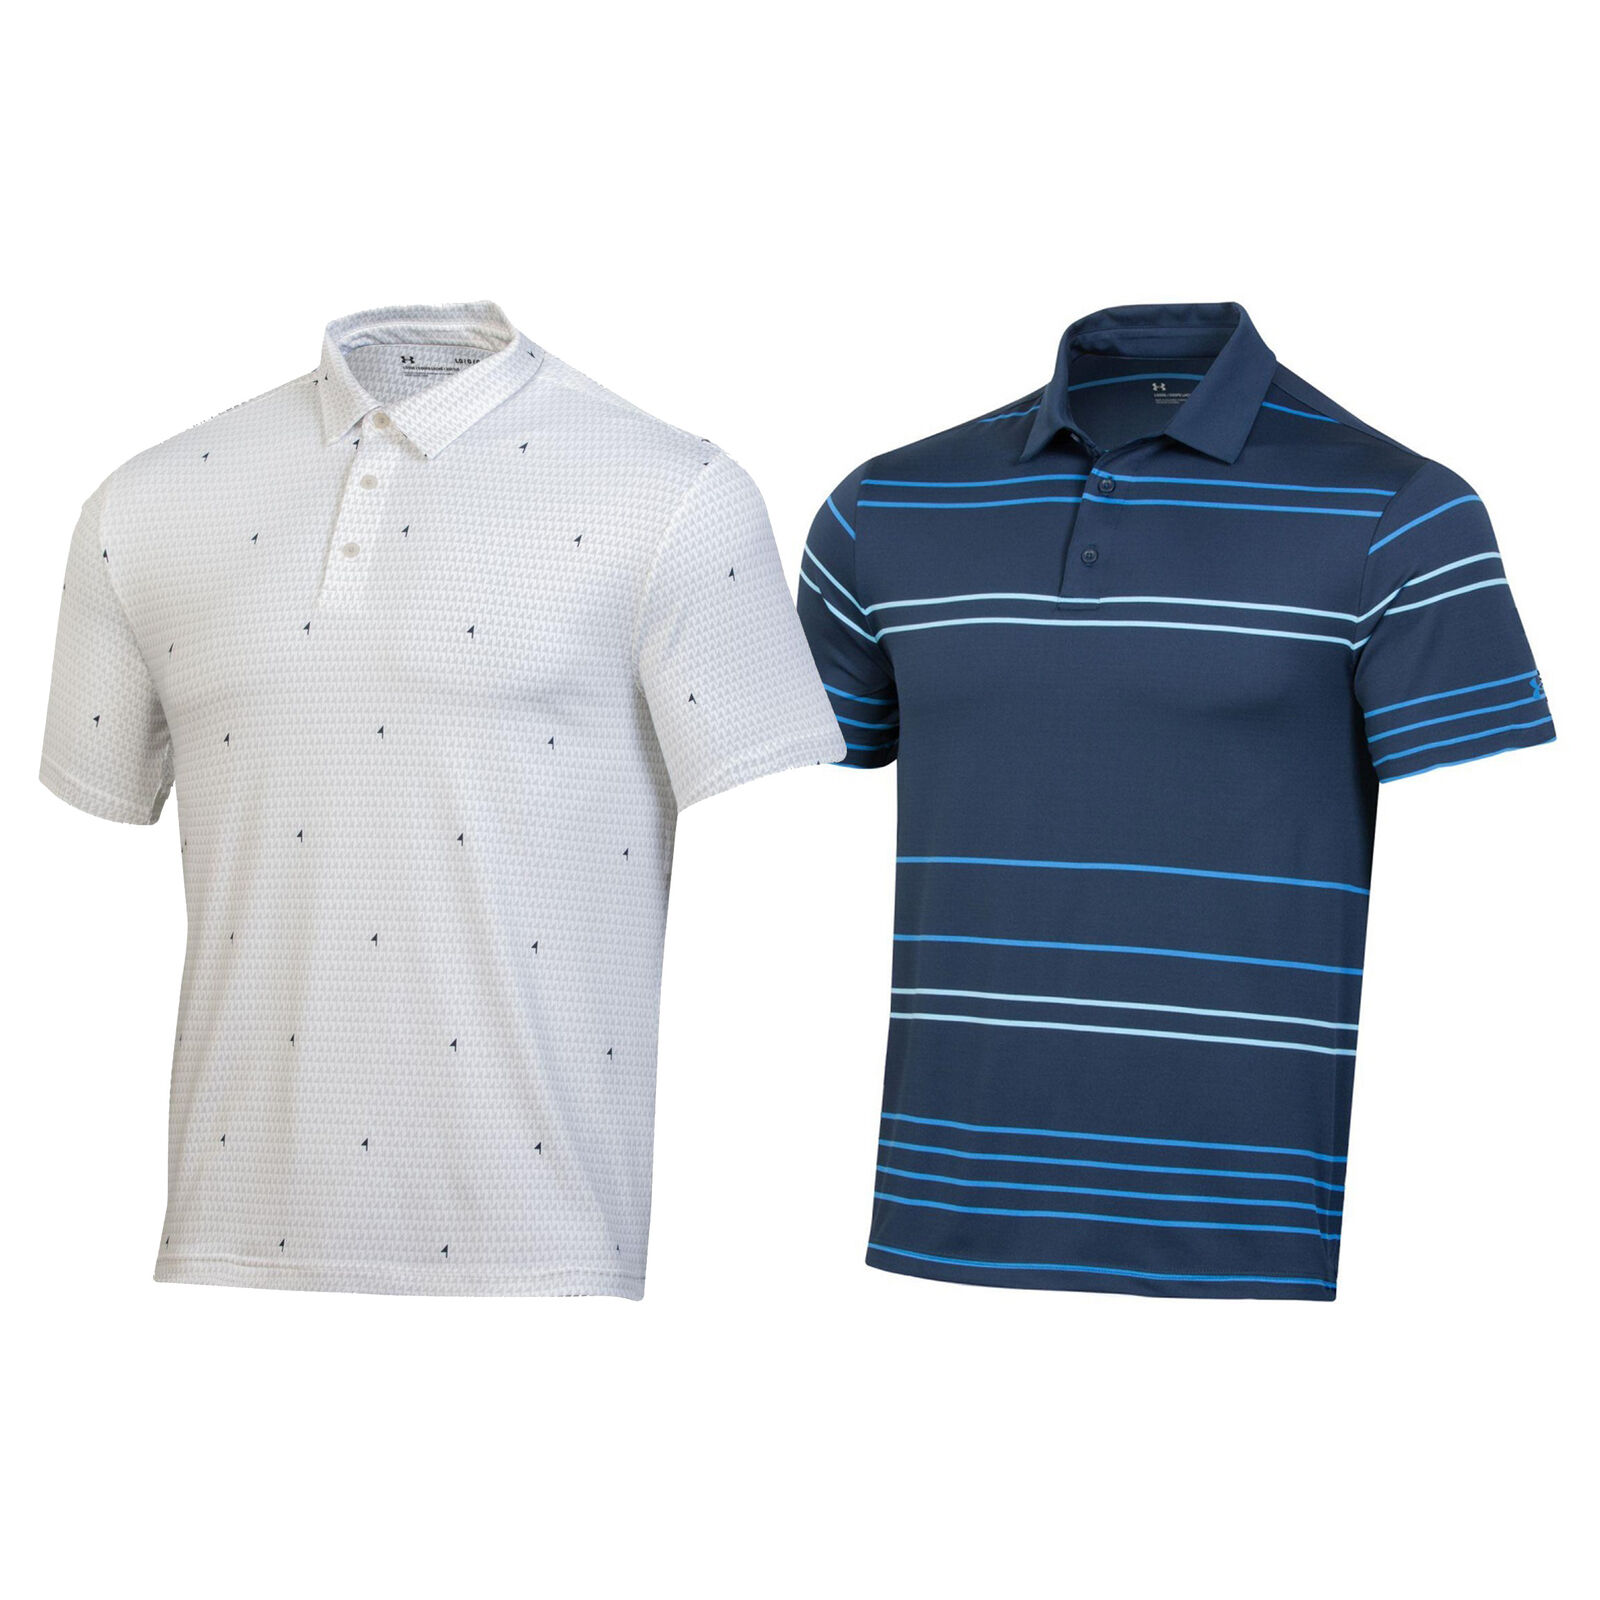 NEW Mens Under Armour Assorted Golf Polo 2 Pack $160 Retail - Choose Size